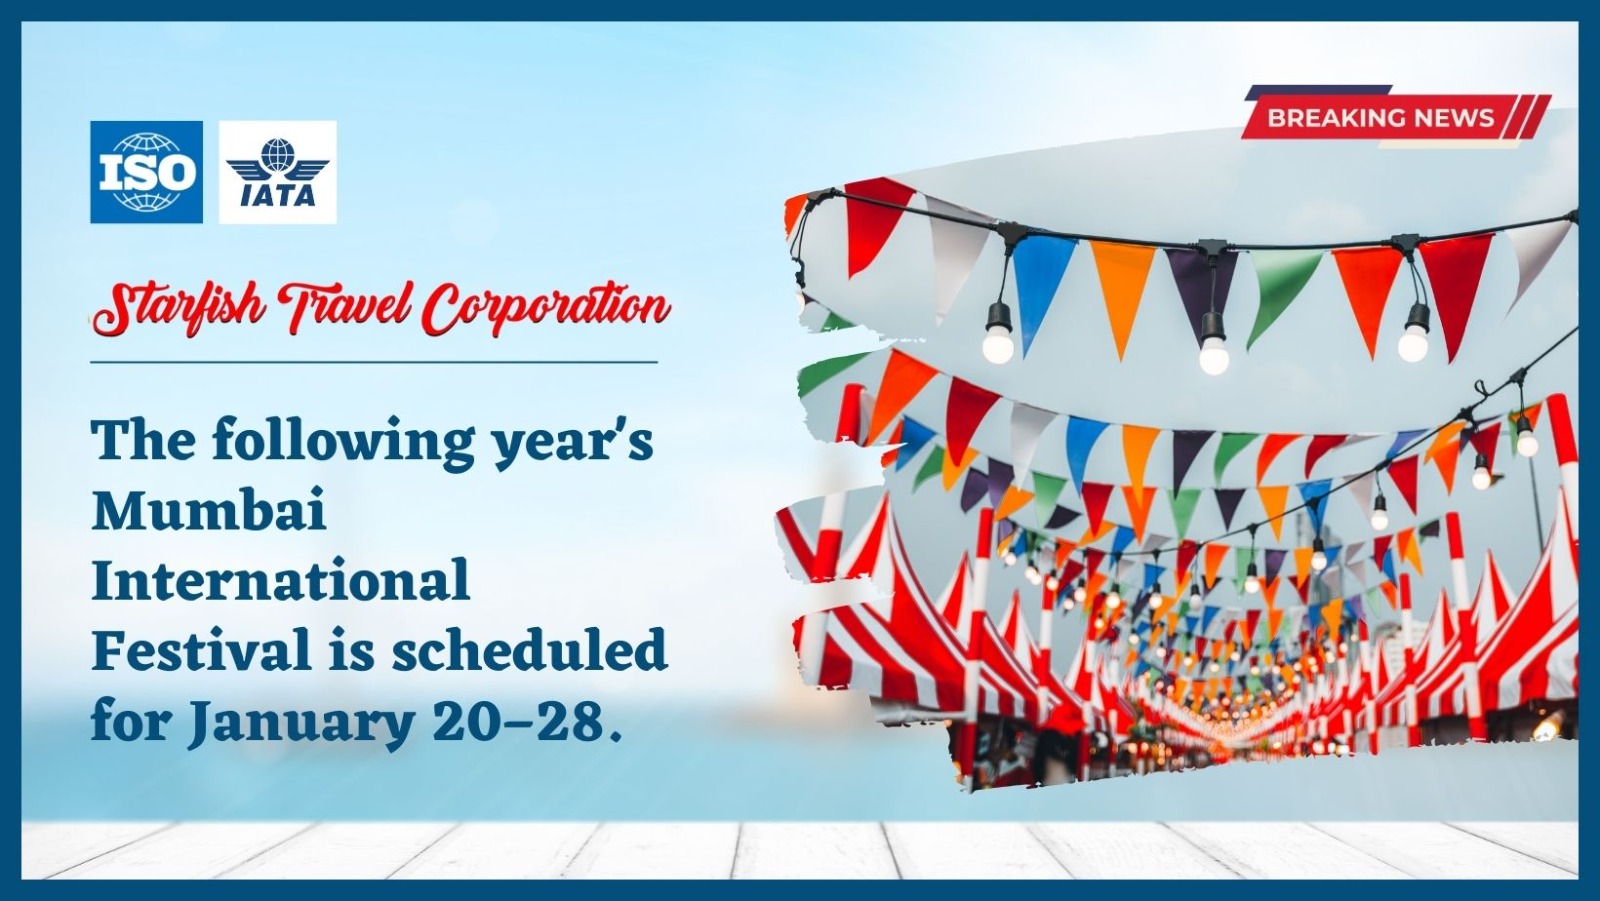 The following year’s Mumbai International Festival is scheduled for January 20–28.